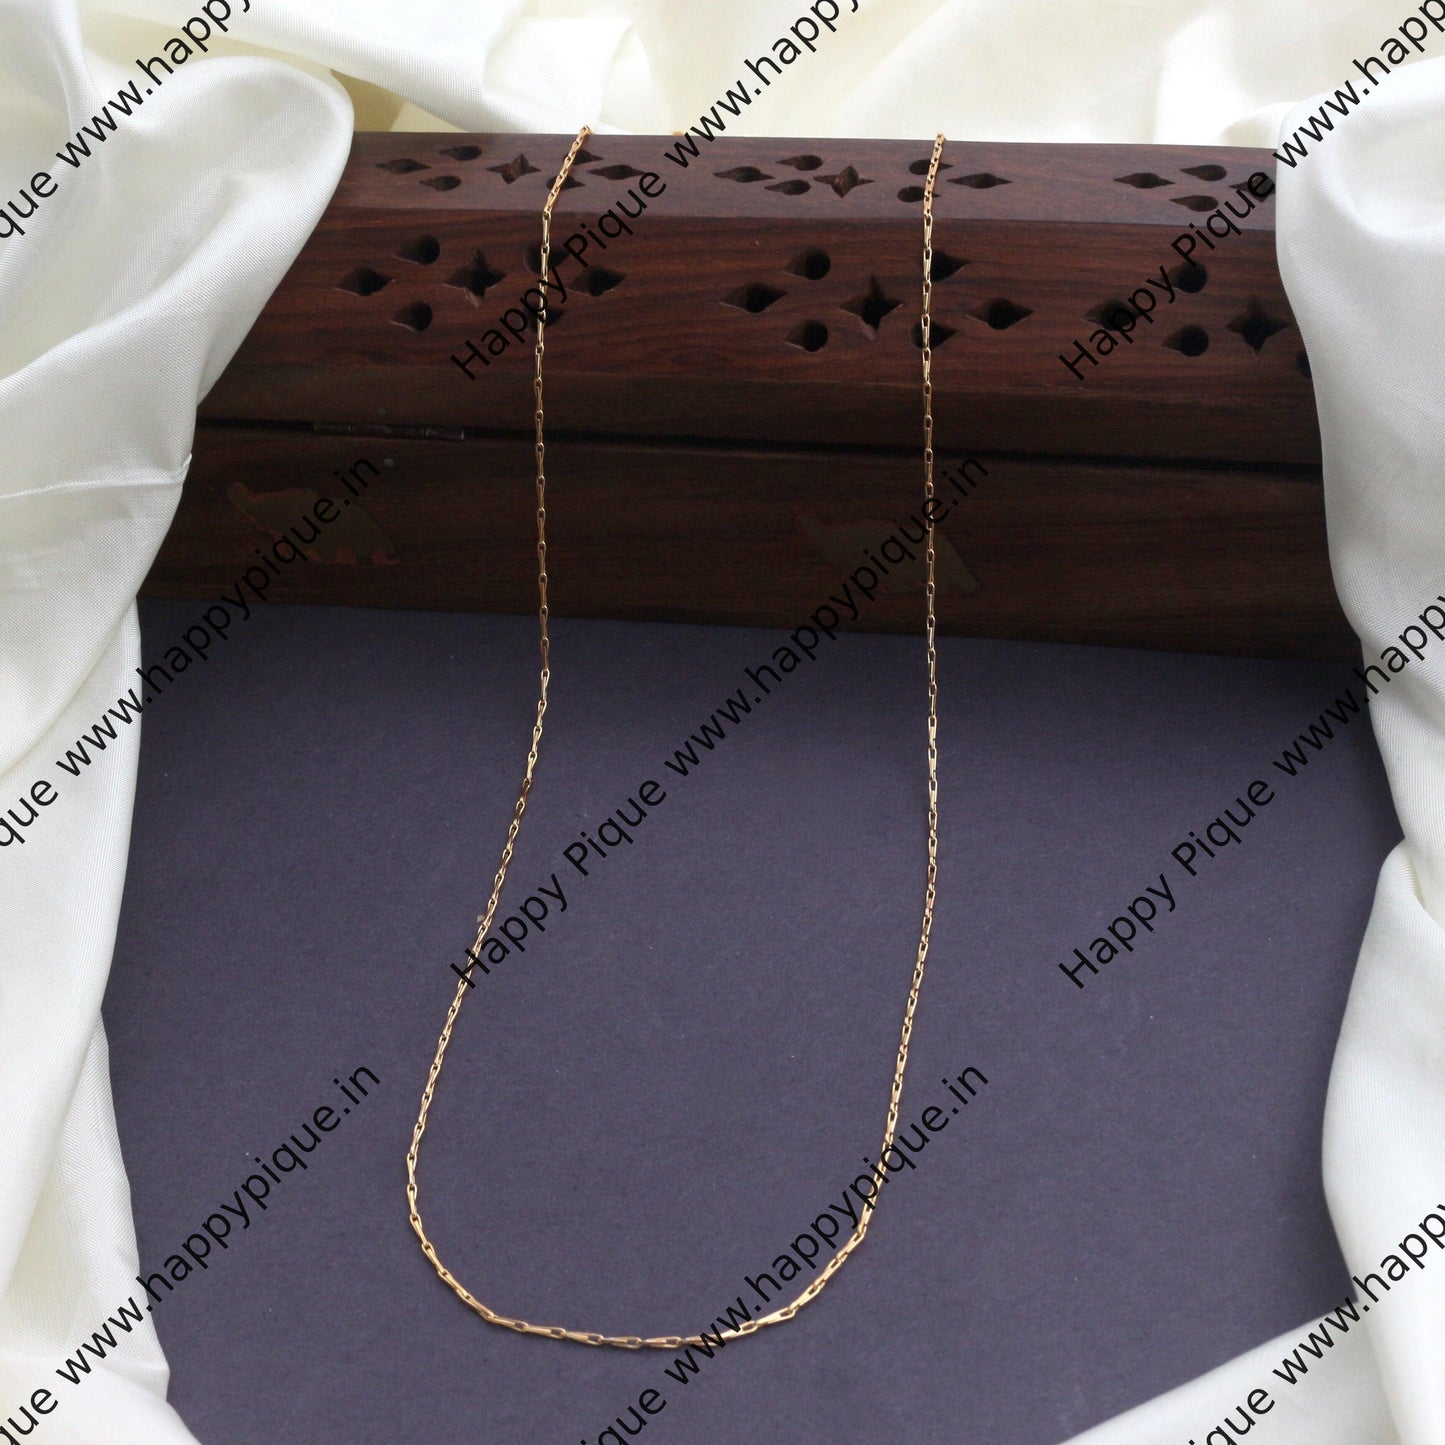 Real Gold Tone Traditional Small Rice Grain Chain - 24 Inches - SC004